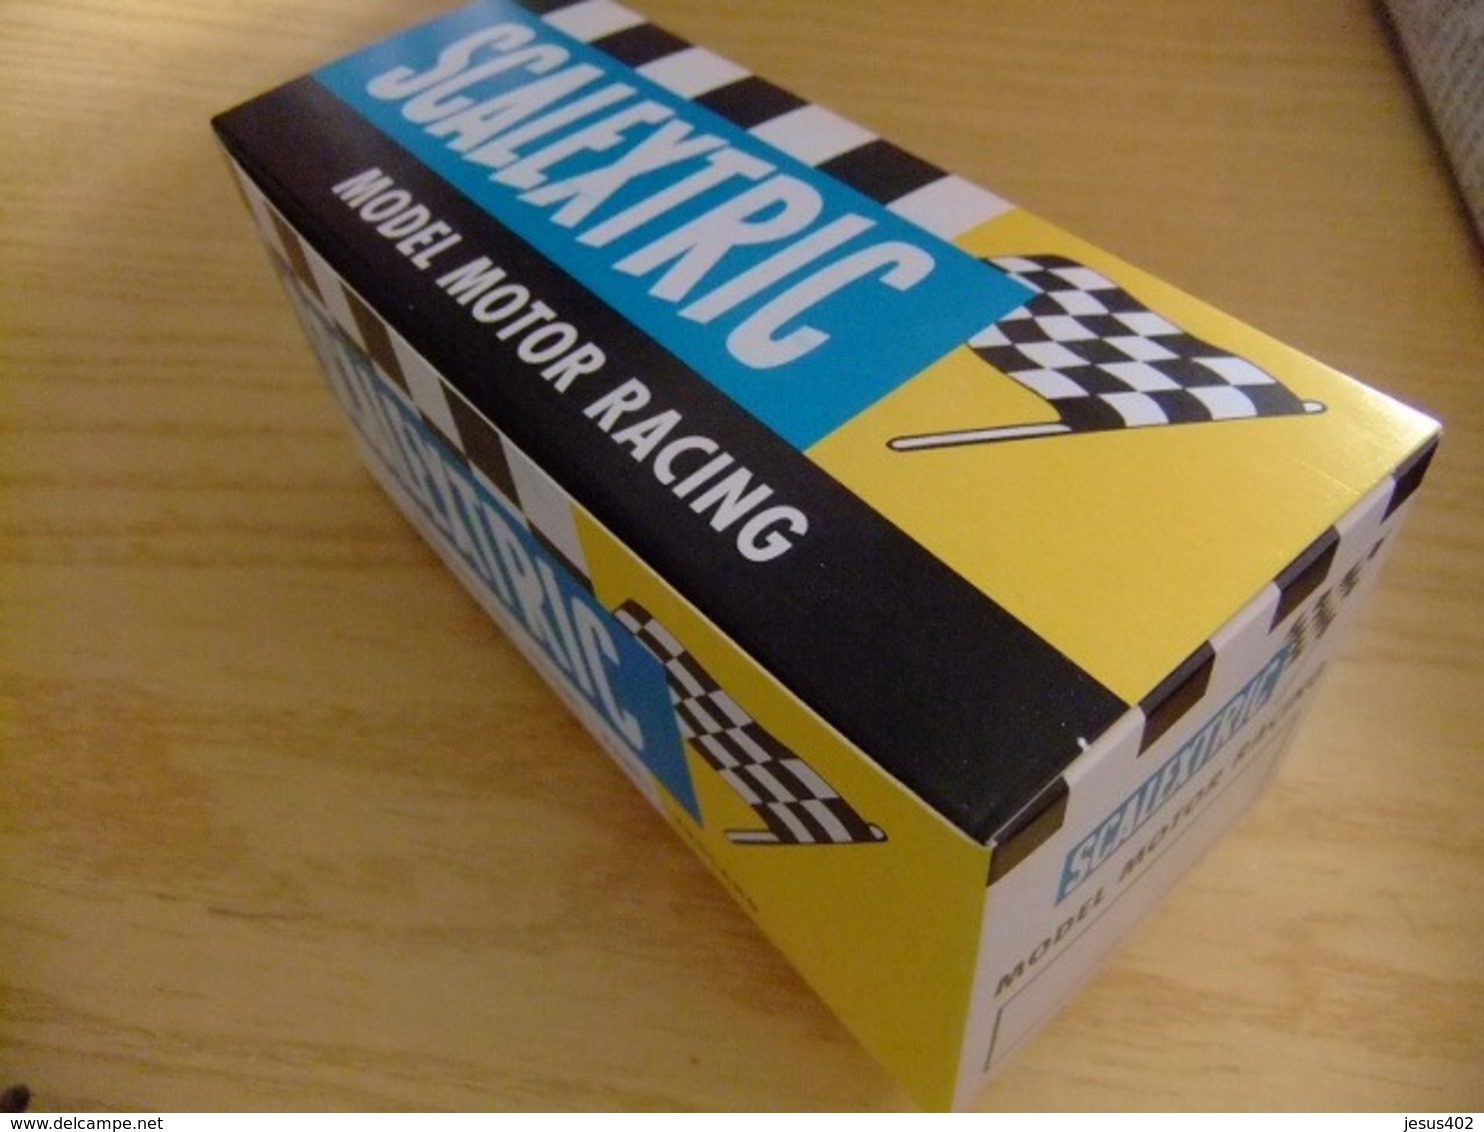 SCALEXTRIC TRIANG CAJA REPRO TIPO INGLÉS / Para Coches Ingleses - Road Racing Sets